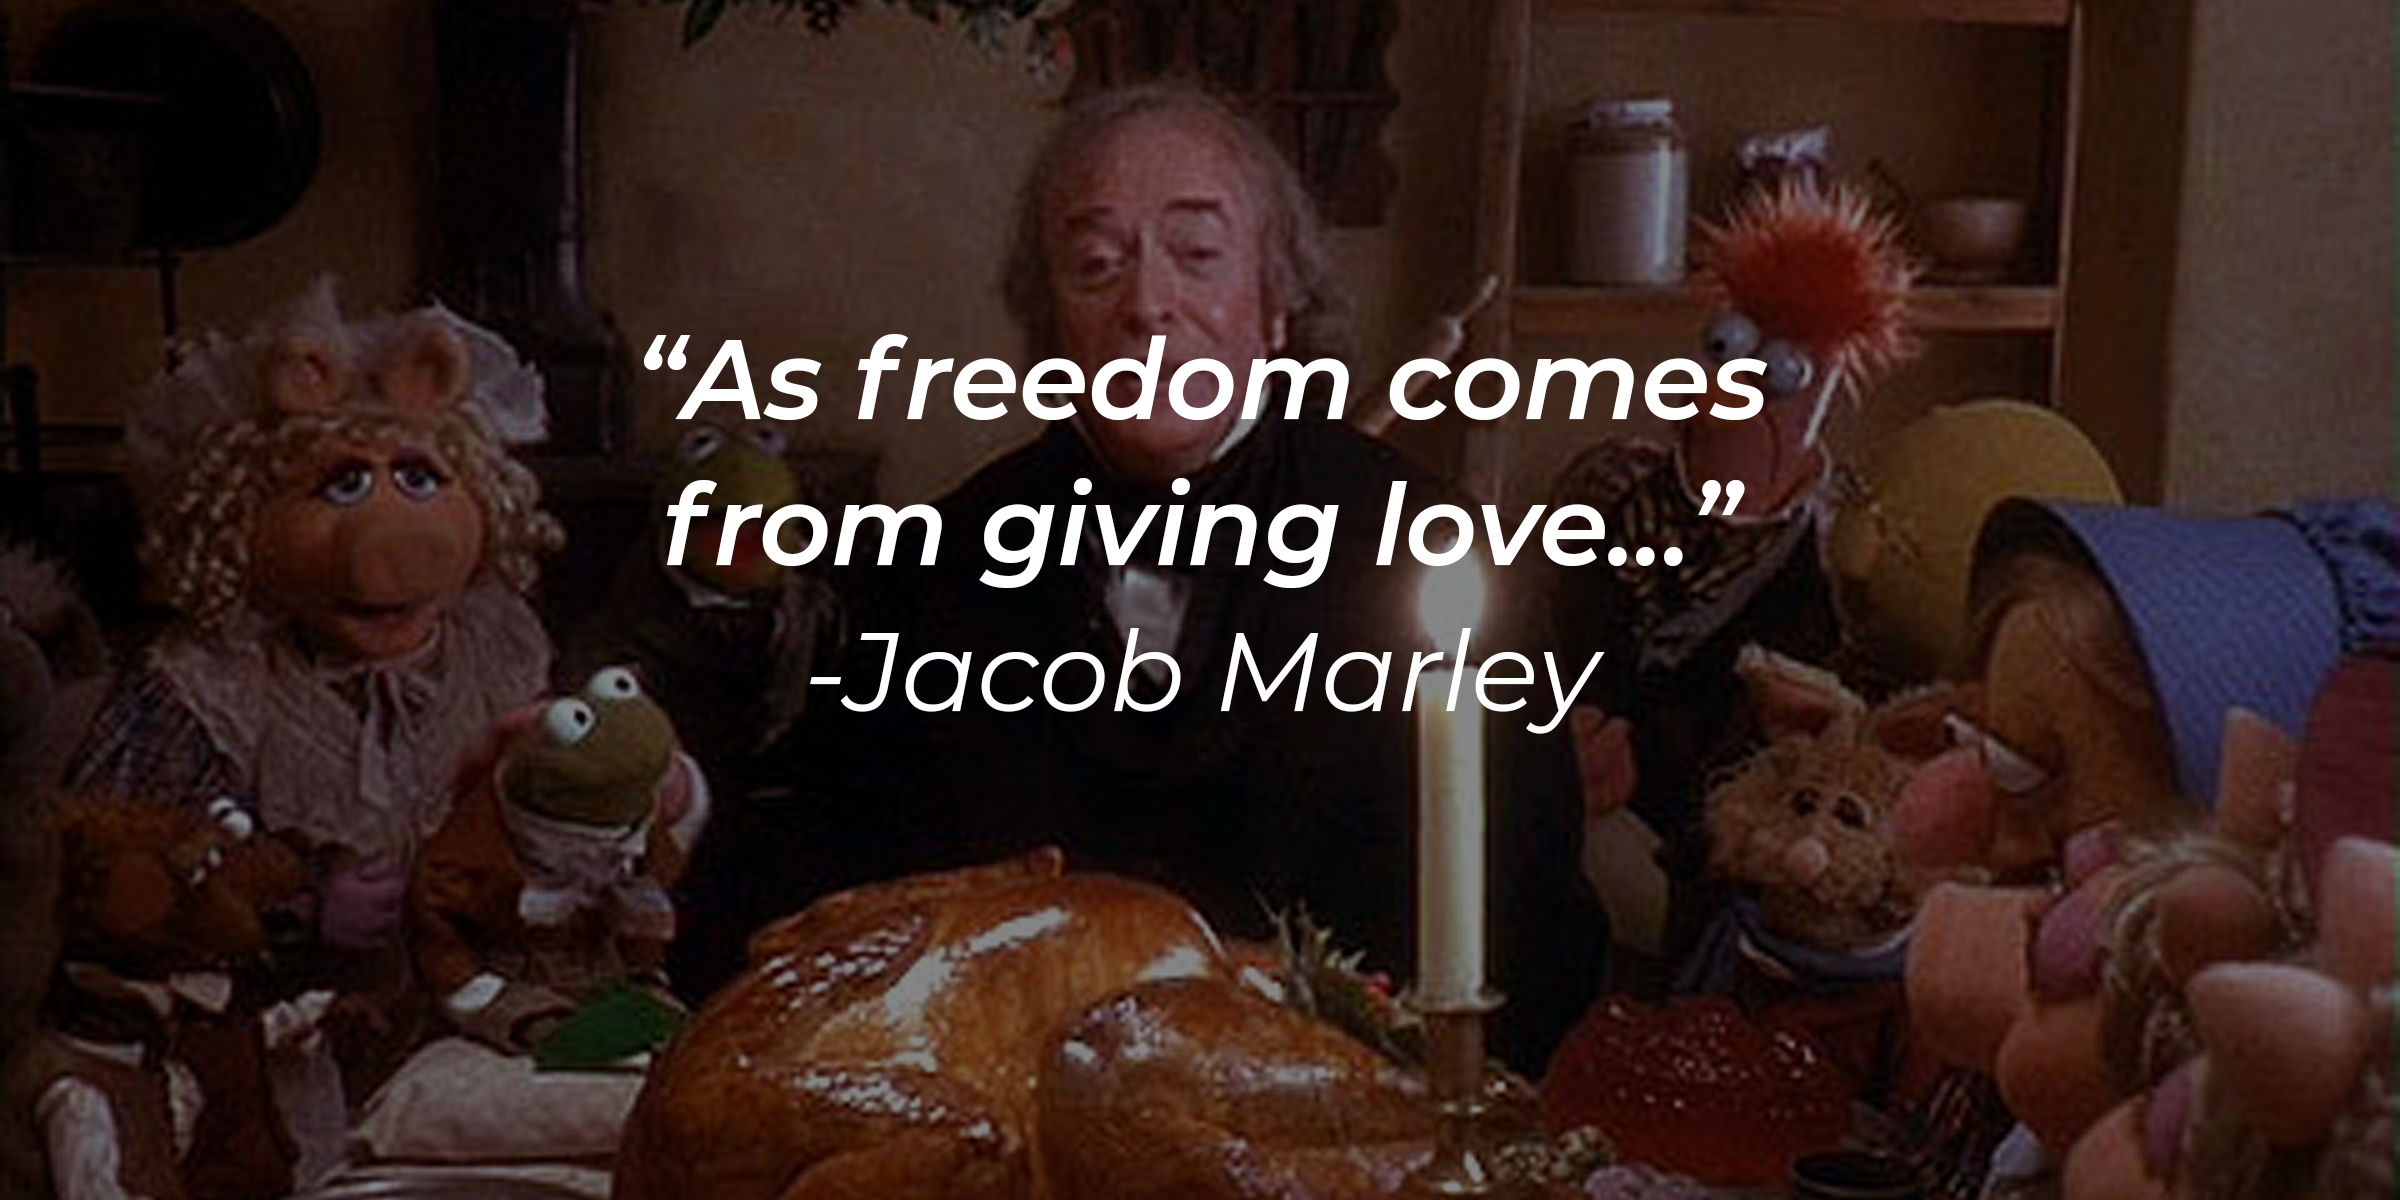 A photo from "The Muppet Christmas Carol" with Jacob Marley's quote: “As freedom comes from giving love…” | Source: facebook.com/The Muppets Christmas Carol